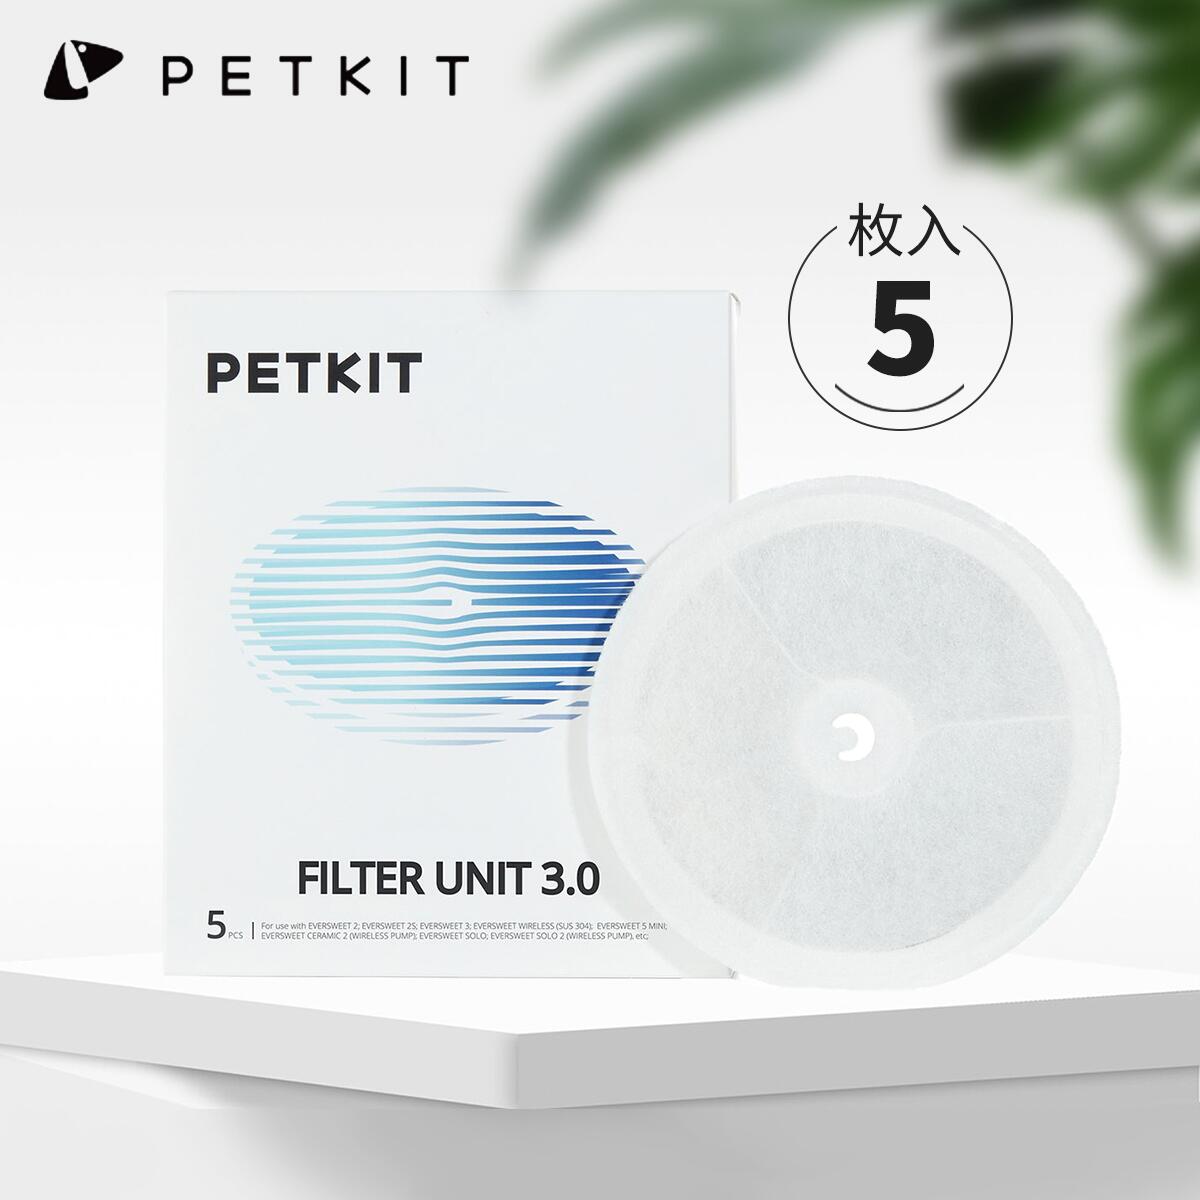 【10%OFFクーポンあり】PETKIT【正規品】フィルター 3.0 新型 ペットキット 給水器 2nd世代 3nd世代 PETKIT CYBERTAIL 給水器交換用フィルター 5コセット 